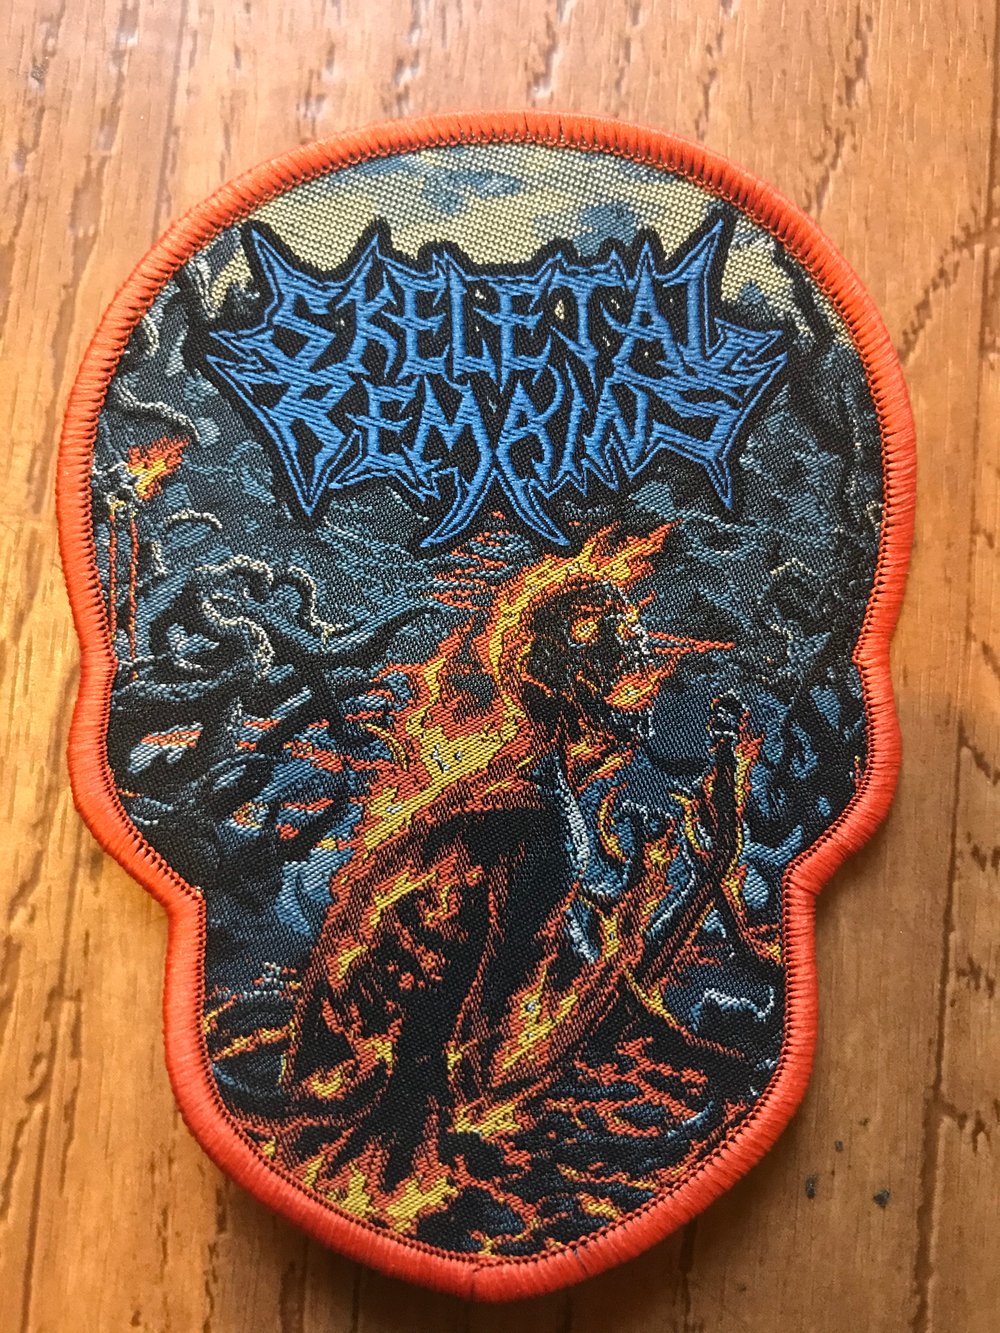 Condemned To Misery Patch 